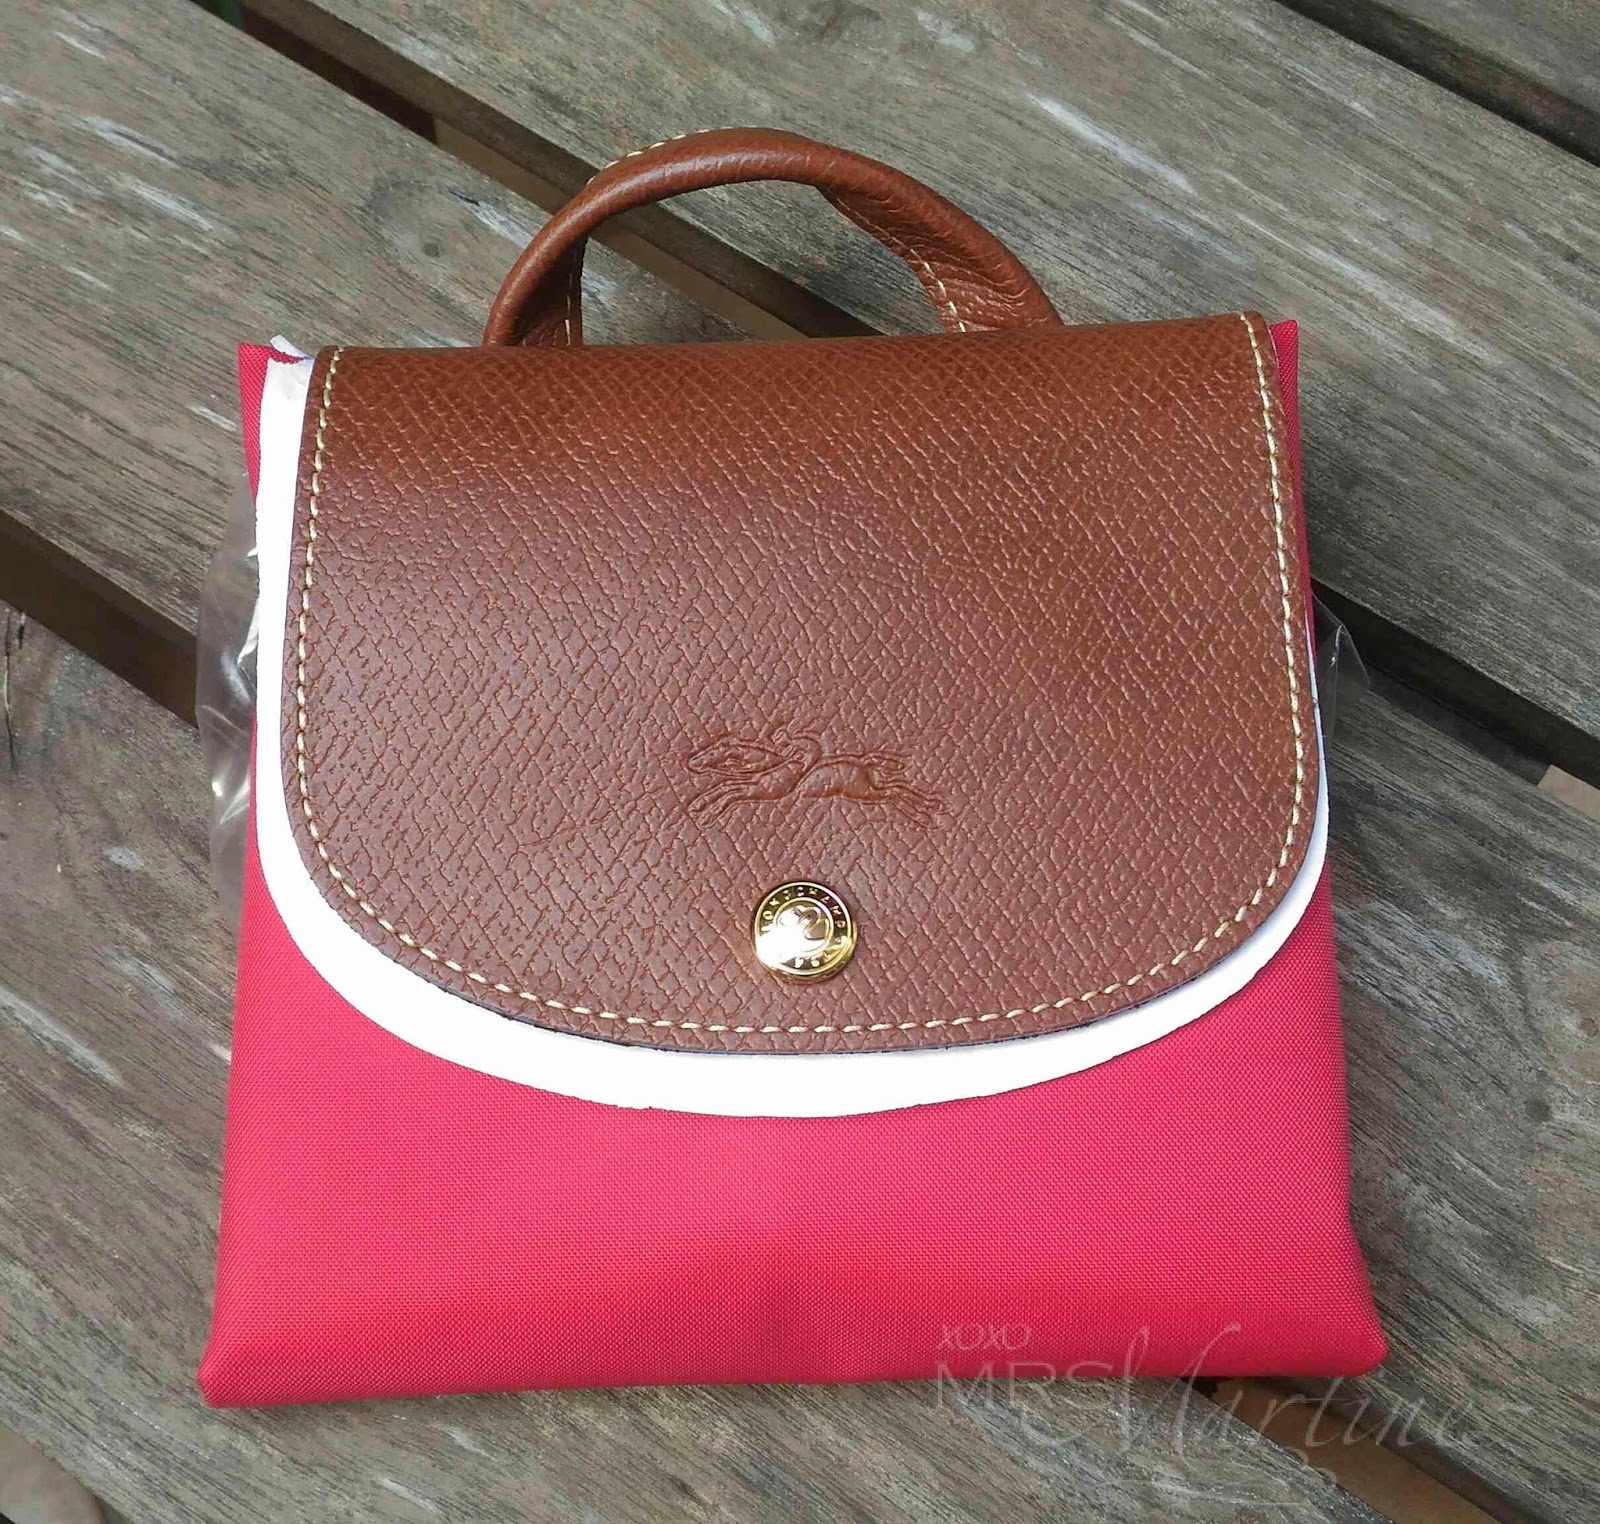 Why the Longchamp bag is the PERFECT gift!, Gallery posted by spiderval